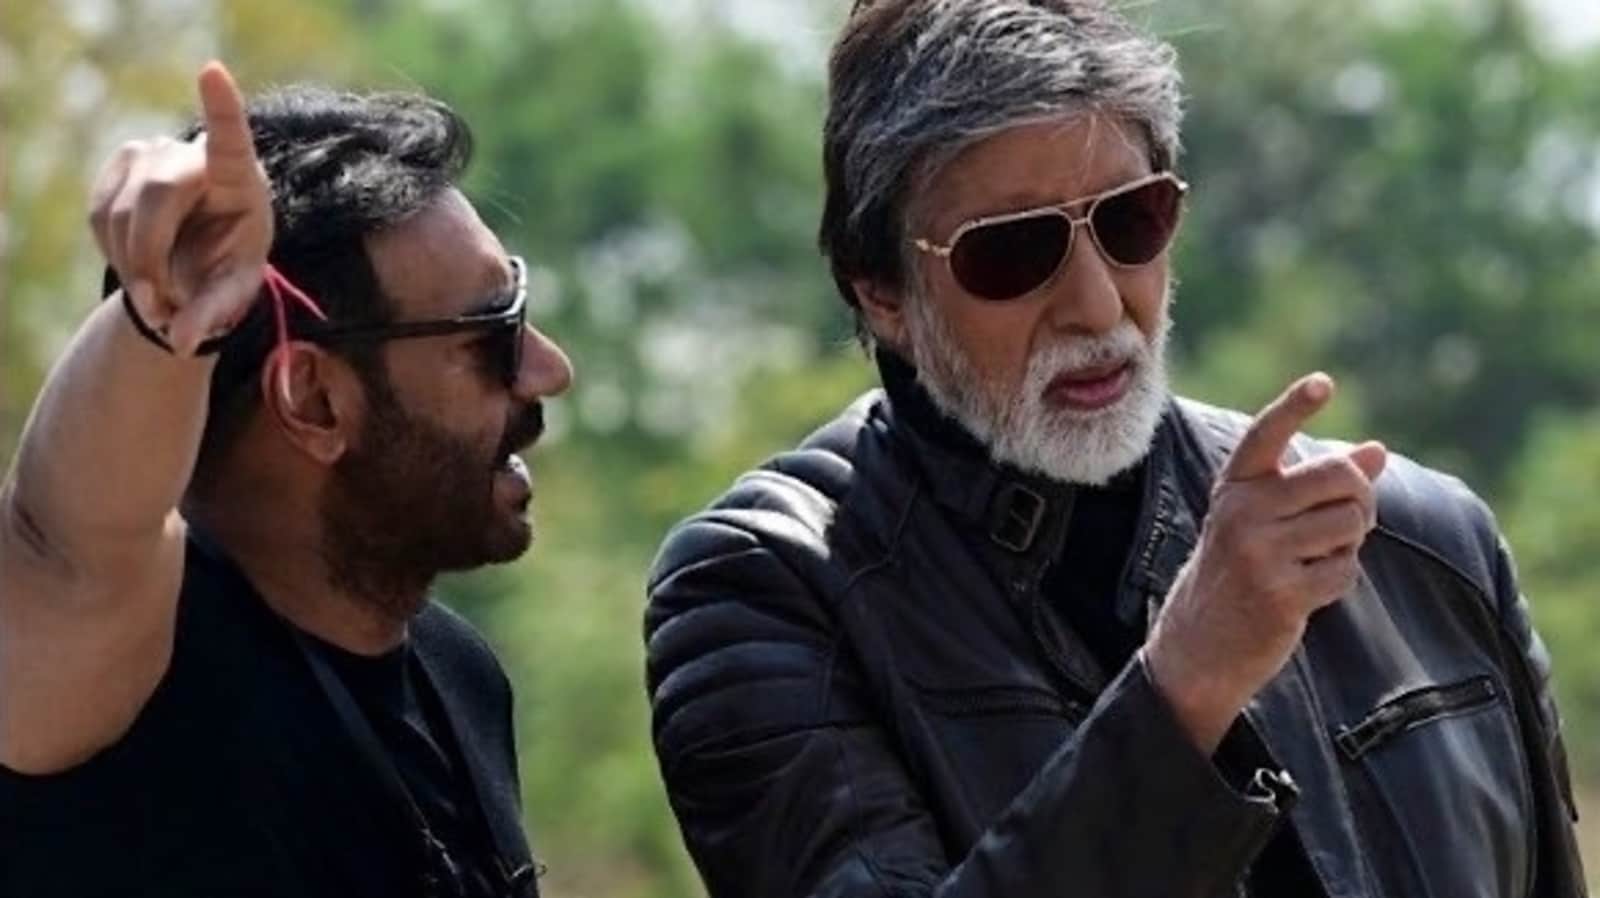 Check out Ajay Devgn's hilarious response after Amitabh Bachchan tries to troll him